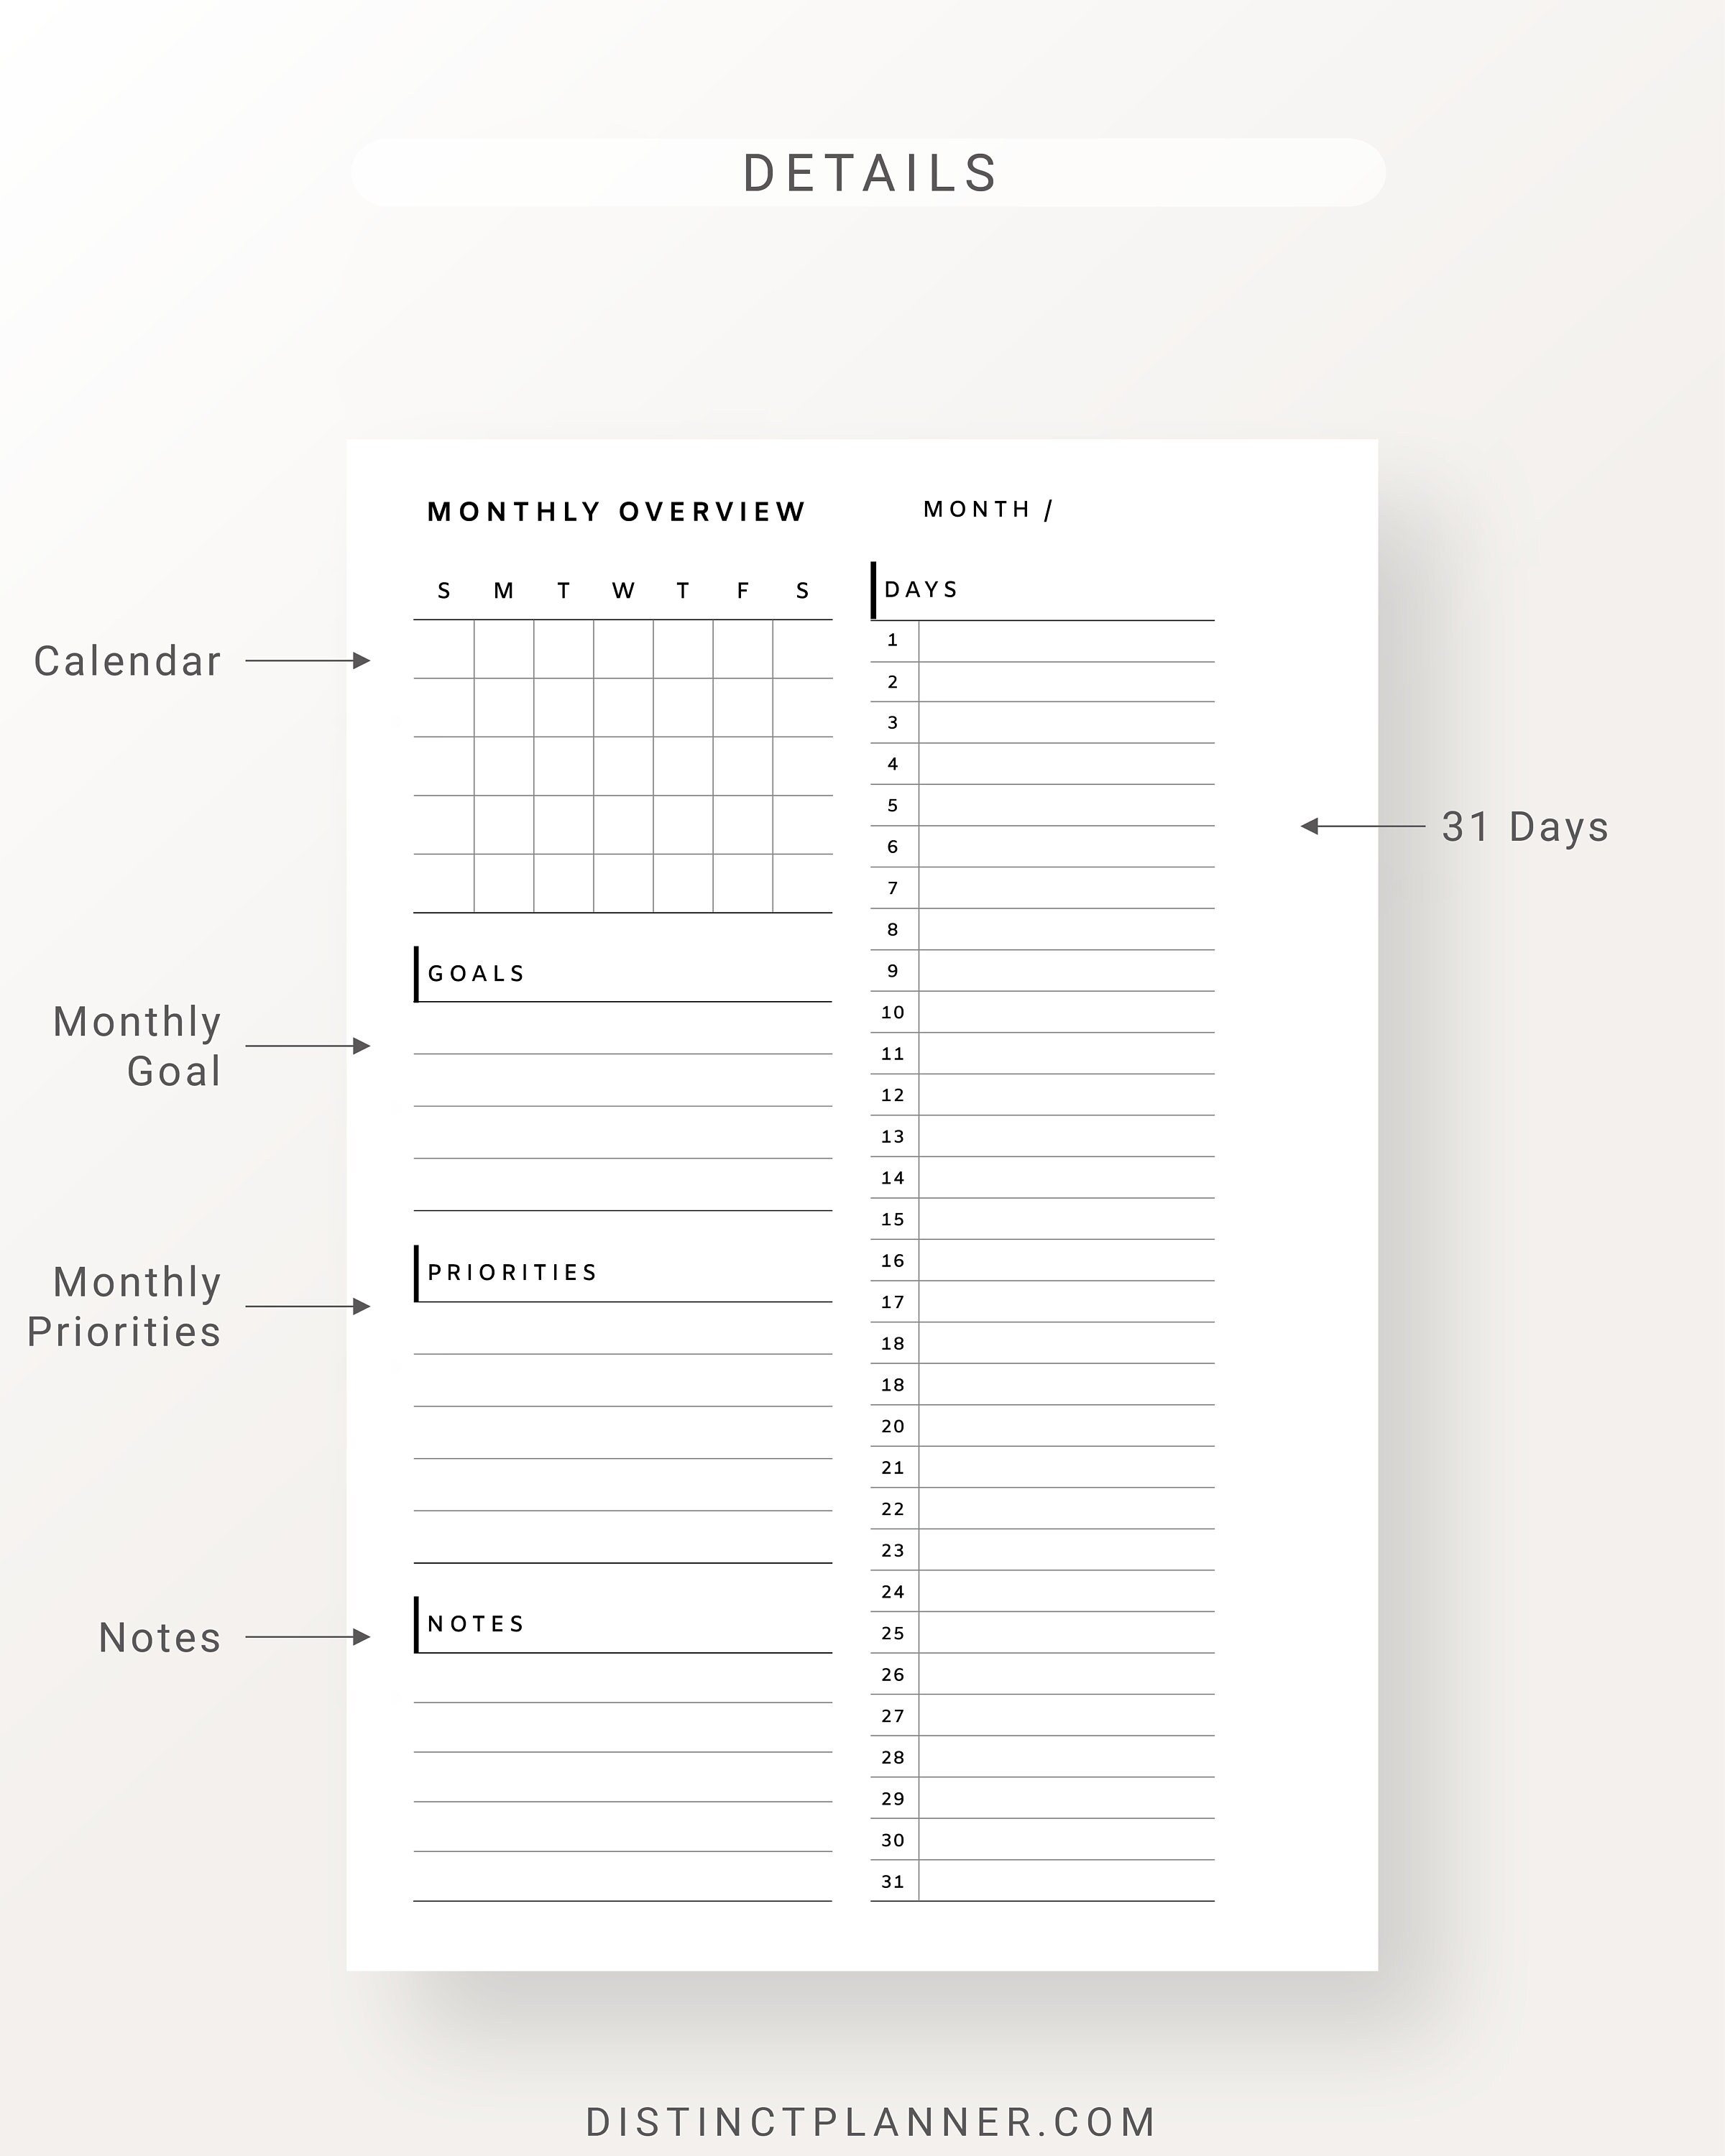 Pocket Undated Monthly Planner Printable Overview on a Page Schedule ...